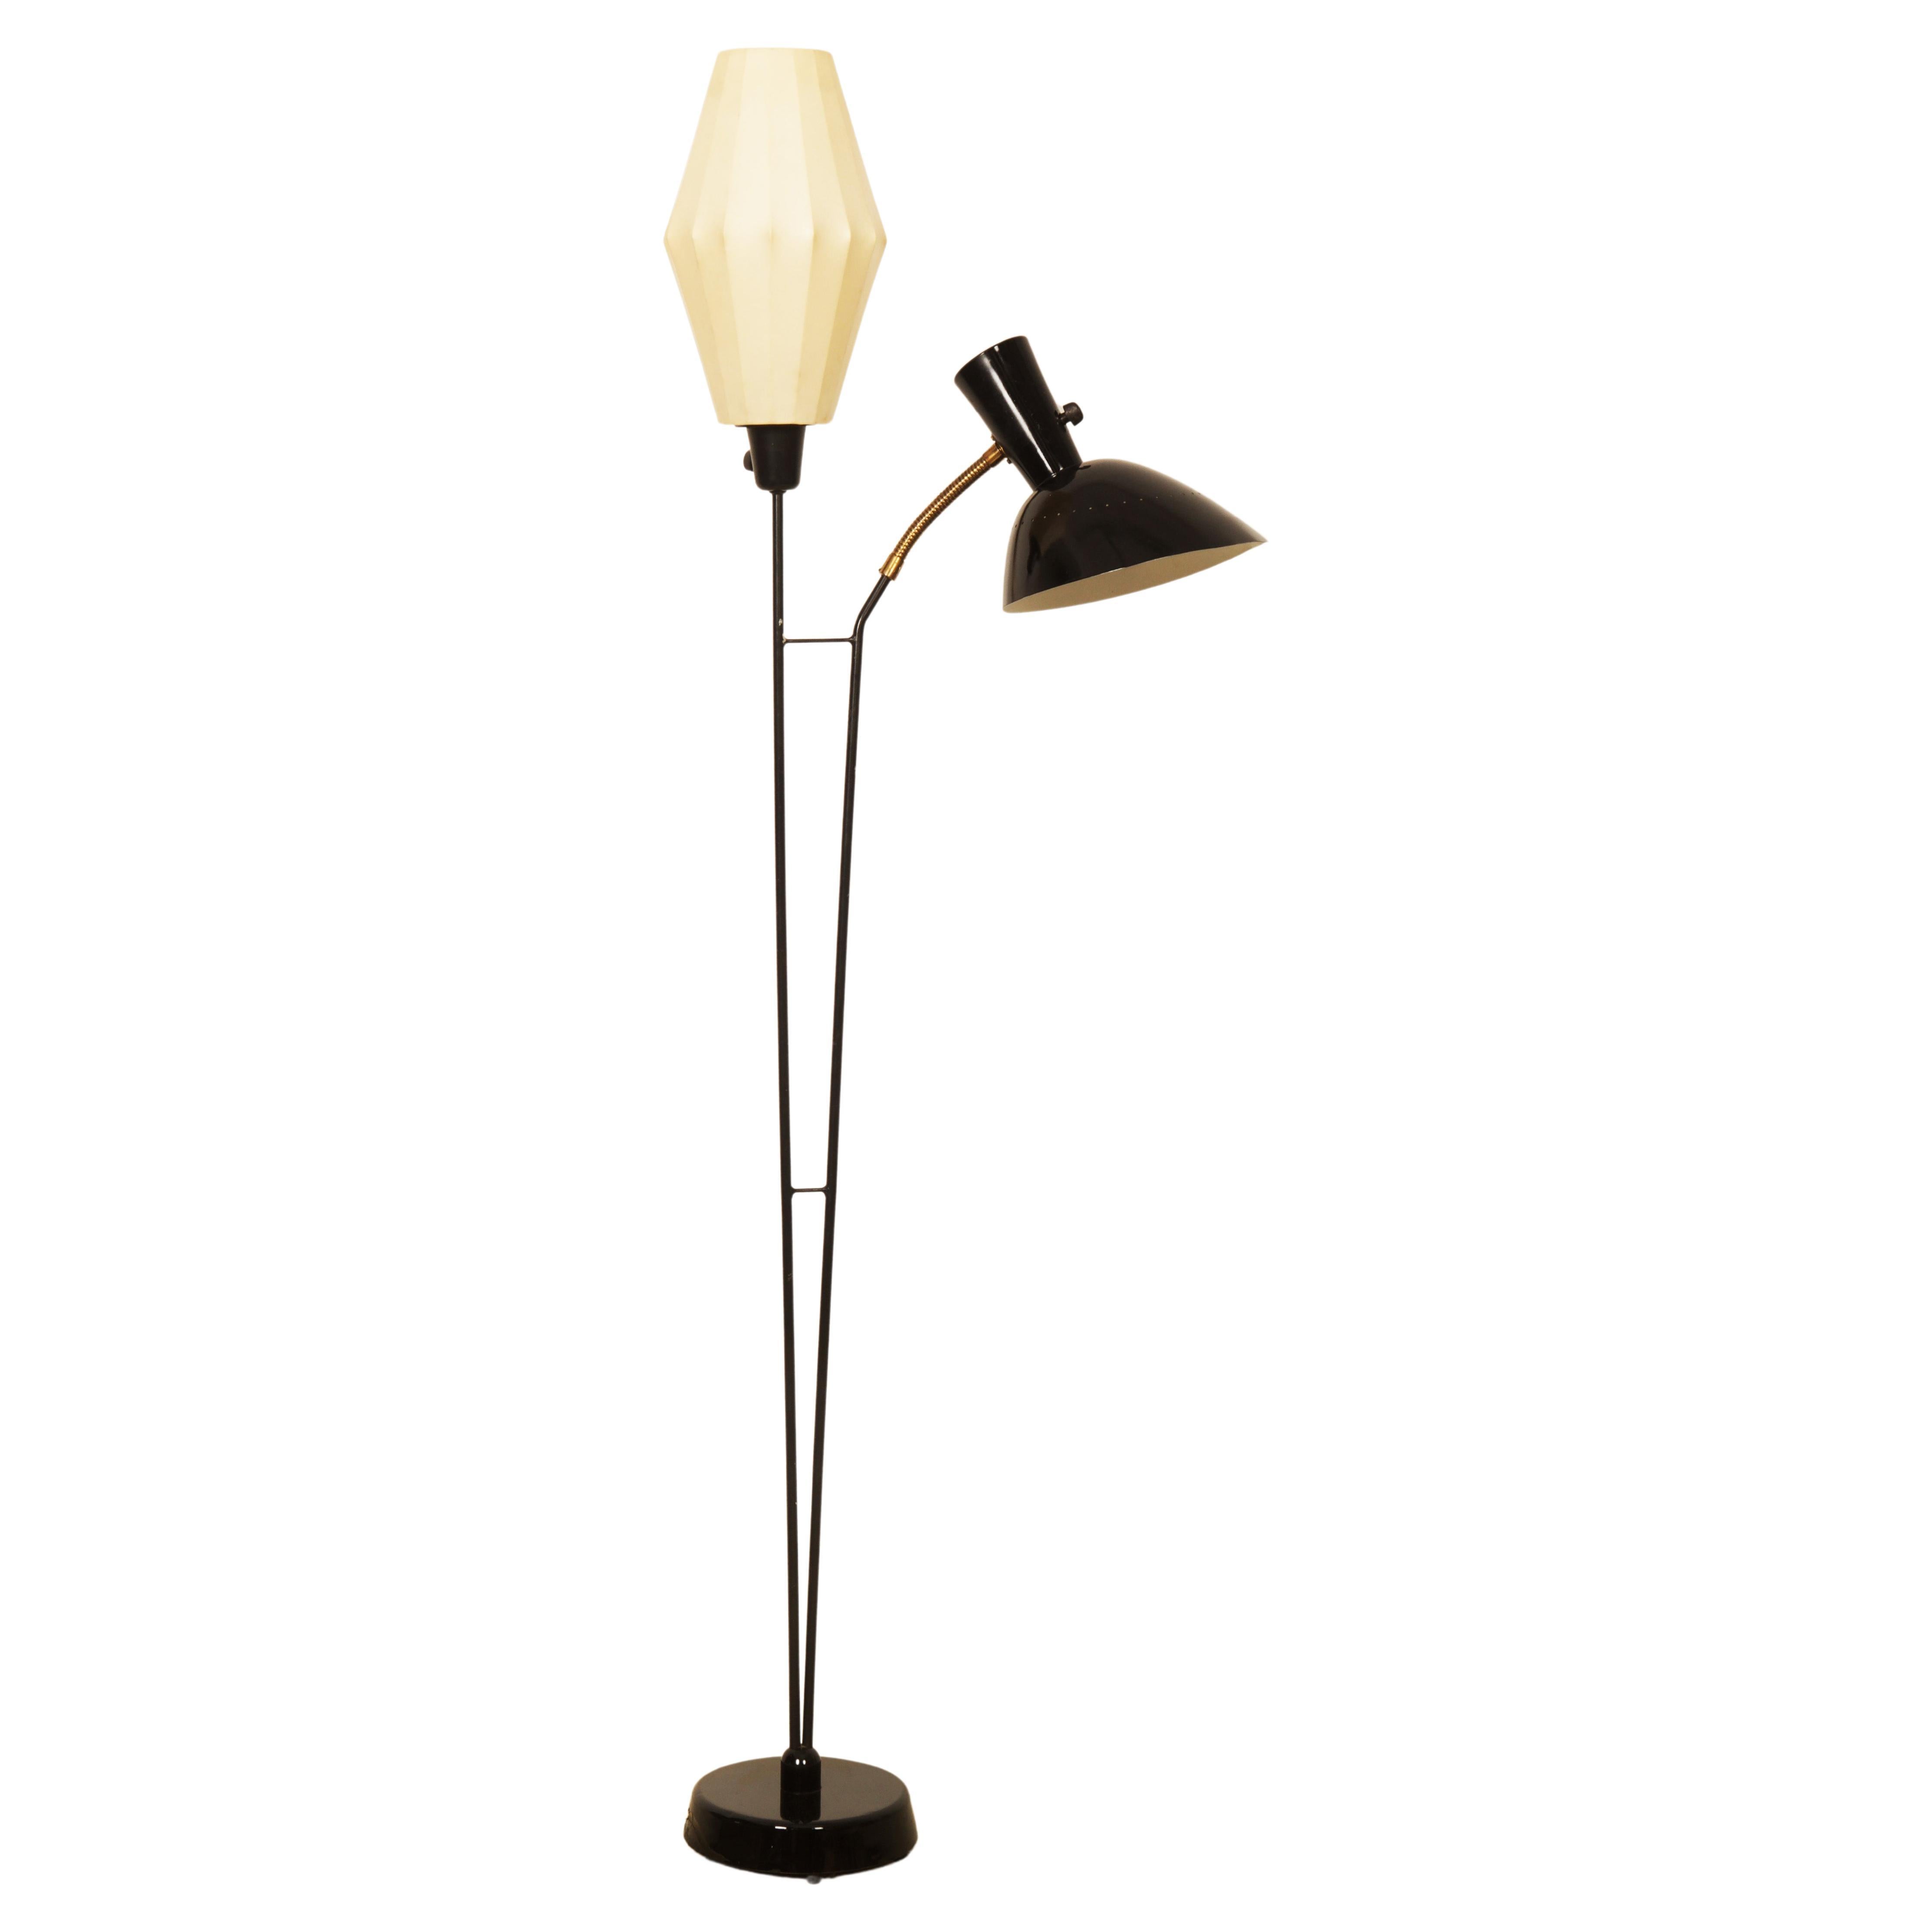 Rare Floor Lamp by Hans Bergström for Ateljé Lyktan from the 1950s